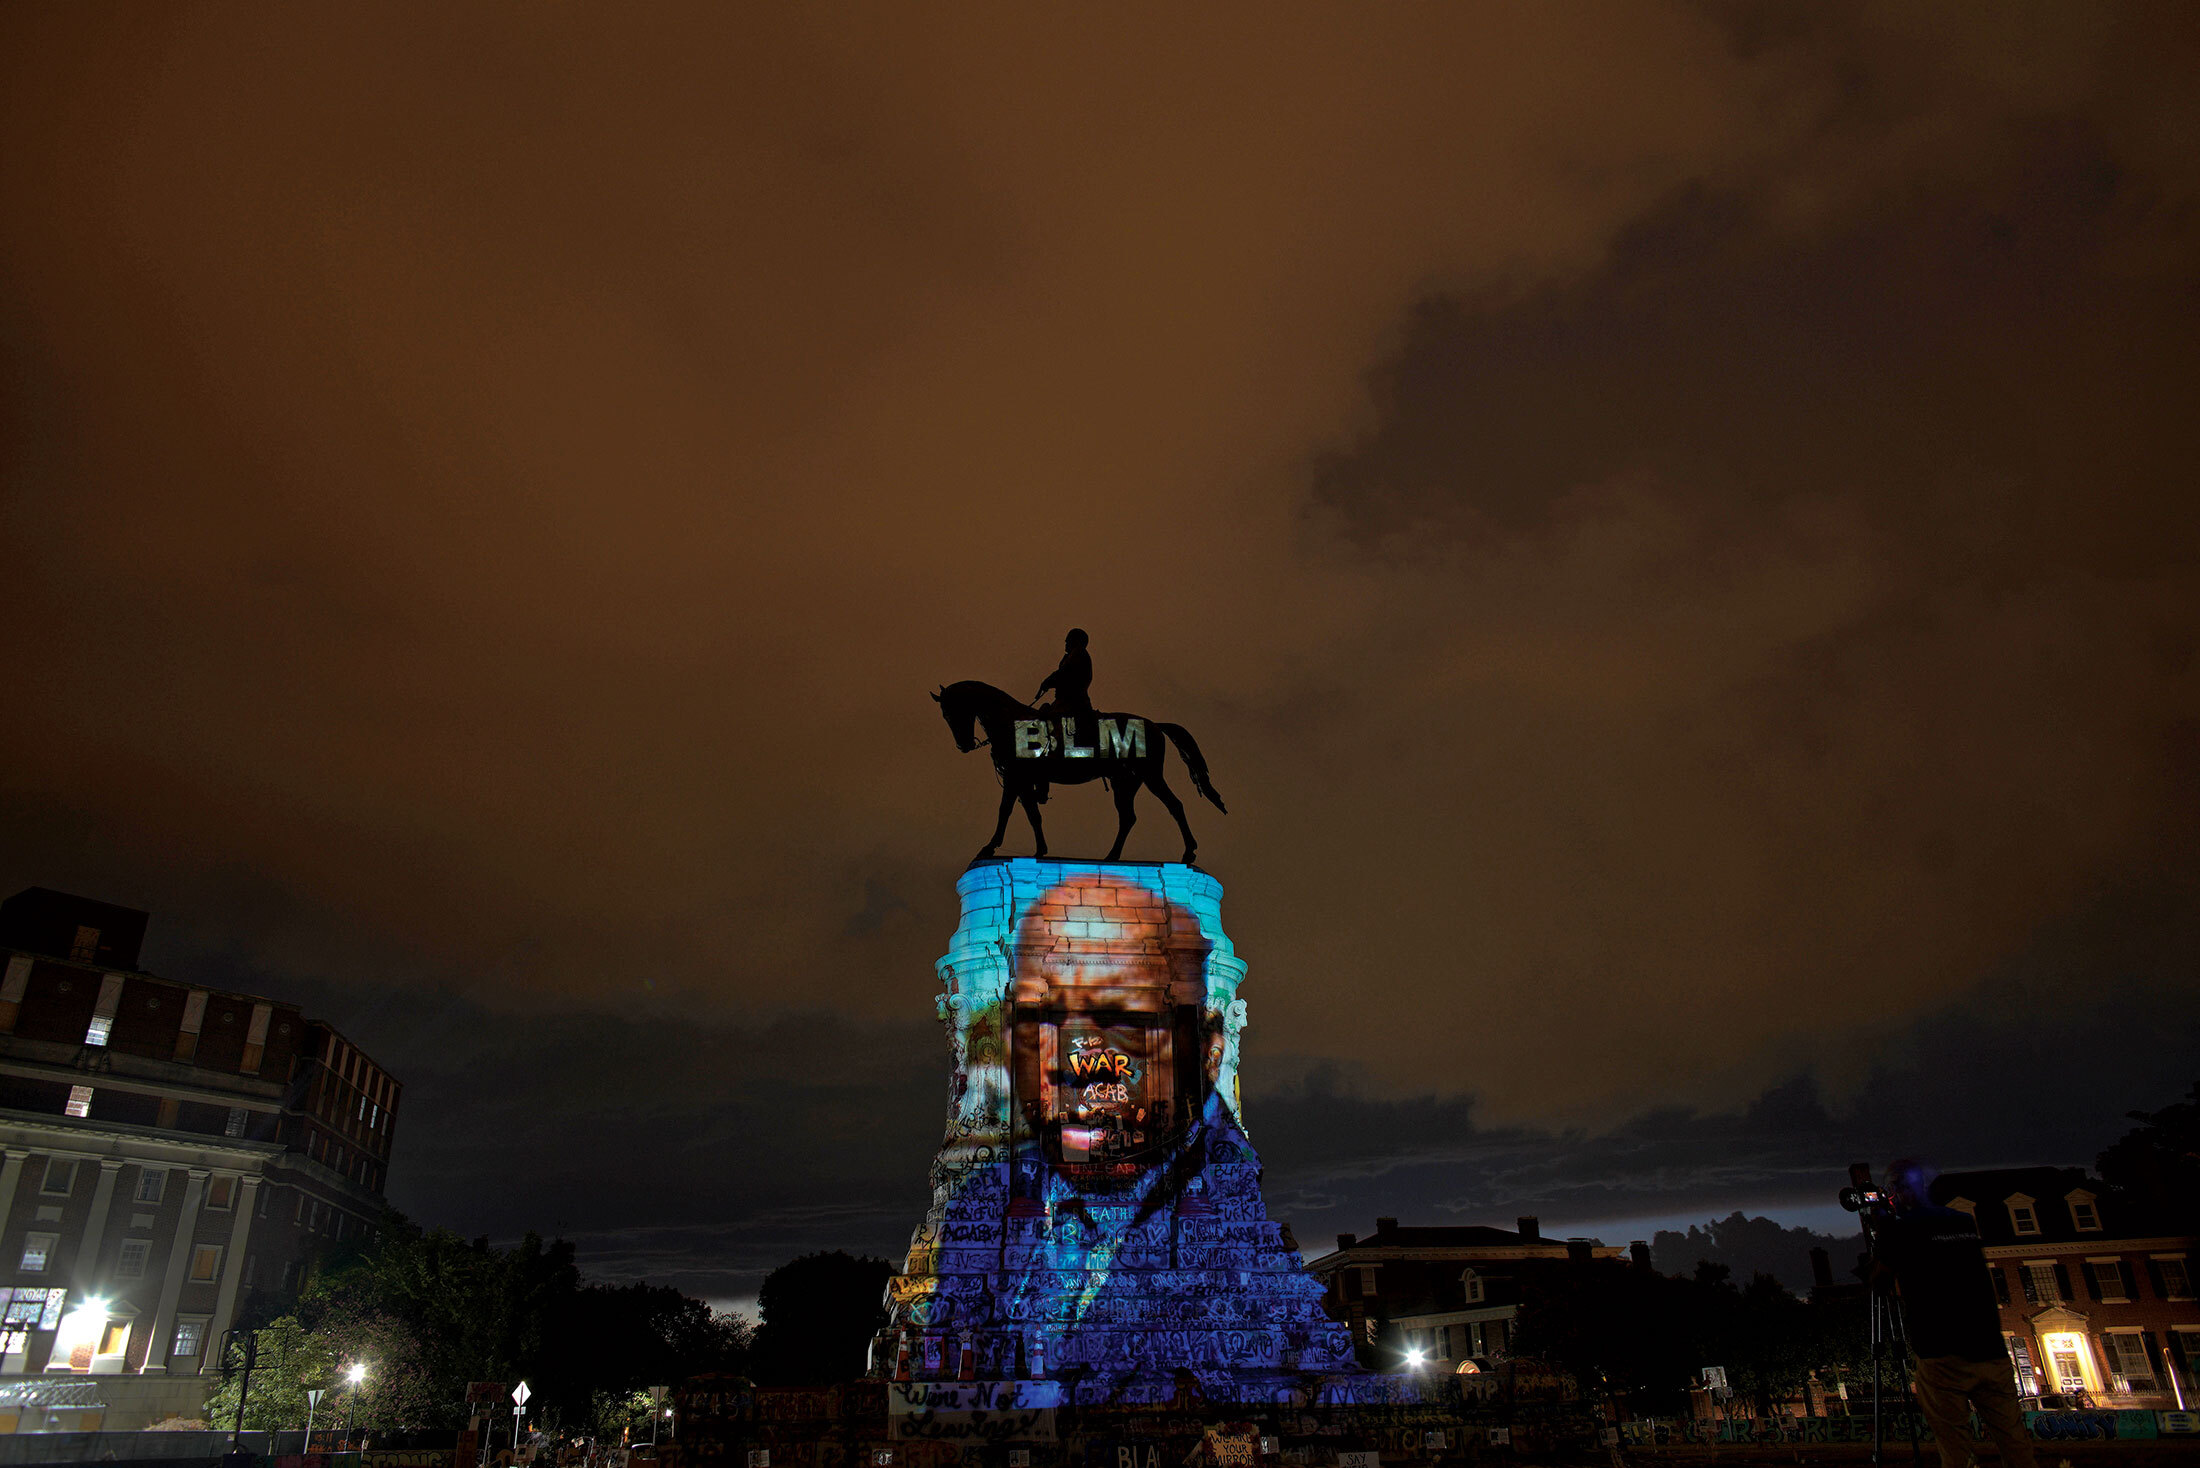 Artist Dustin Klein projected an image of Representative John Lewis—the legendary civil rights leader who died on July 17—onto the Robert E. Lee Monument in Richmond on July 24.